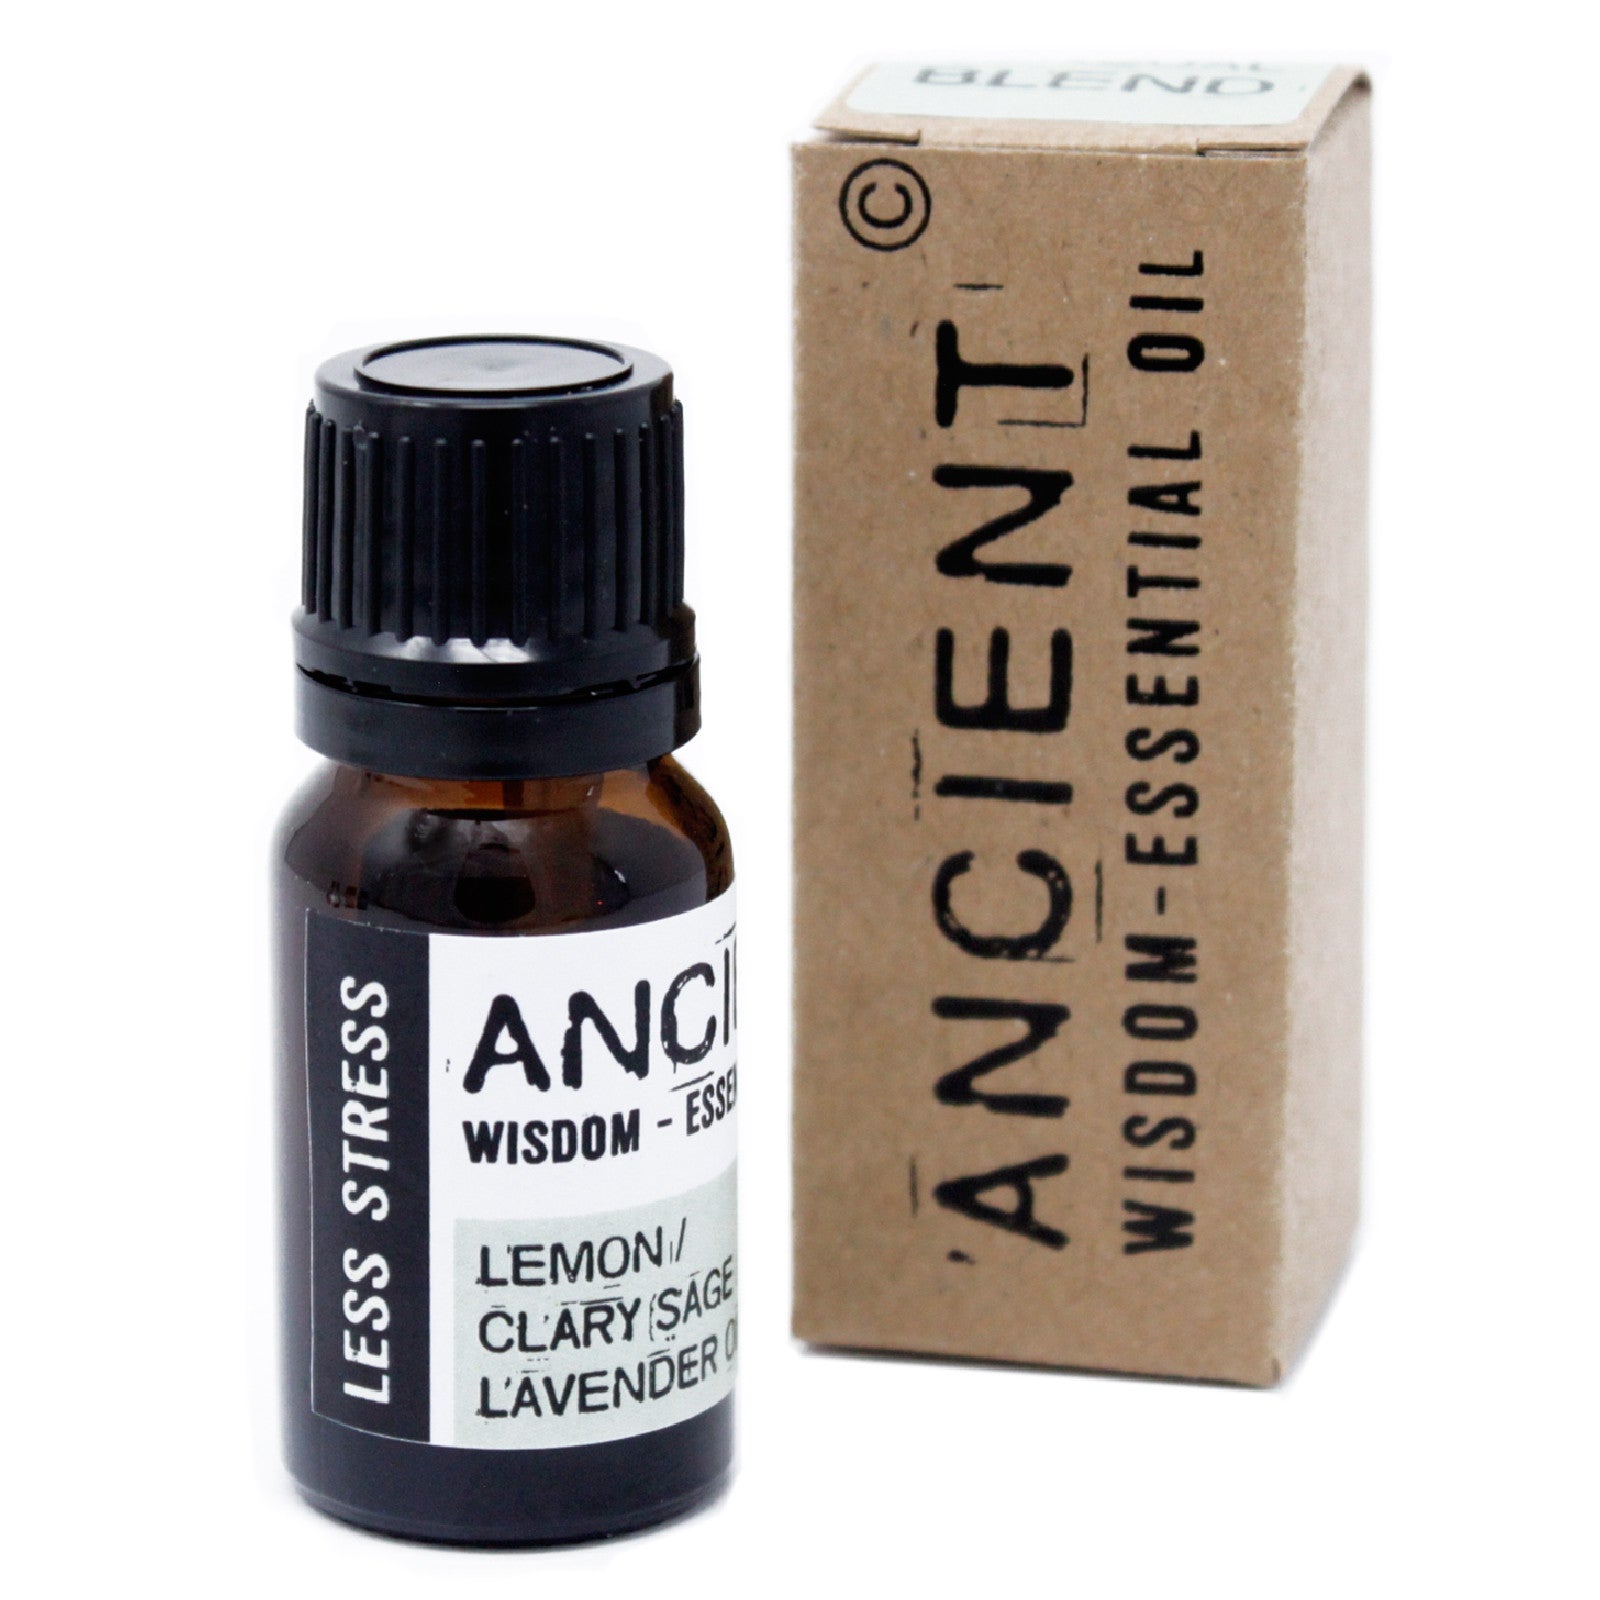 View Less Stress Essential Oil Blend Boxed 10ml information